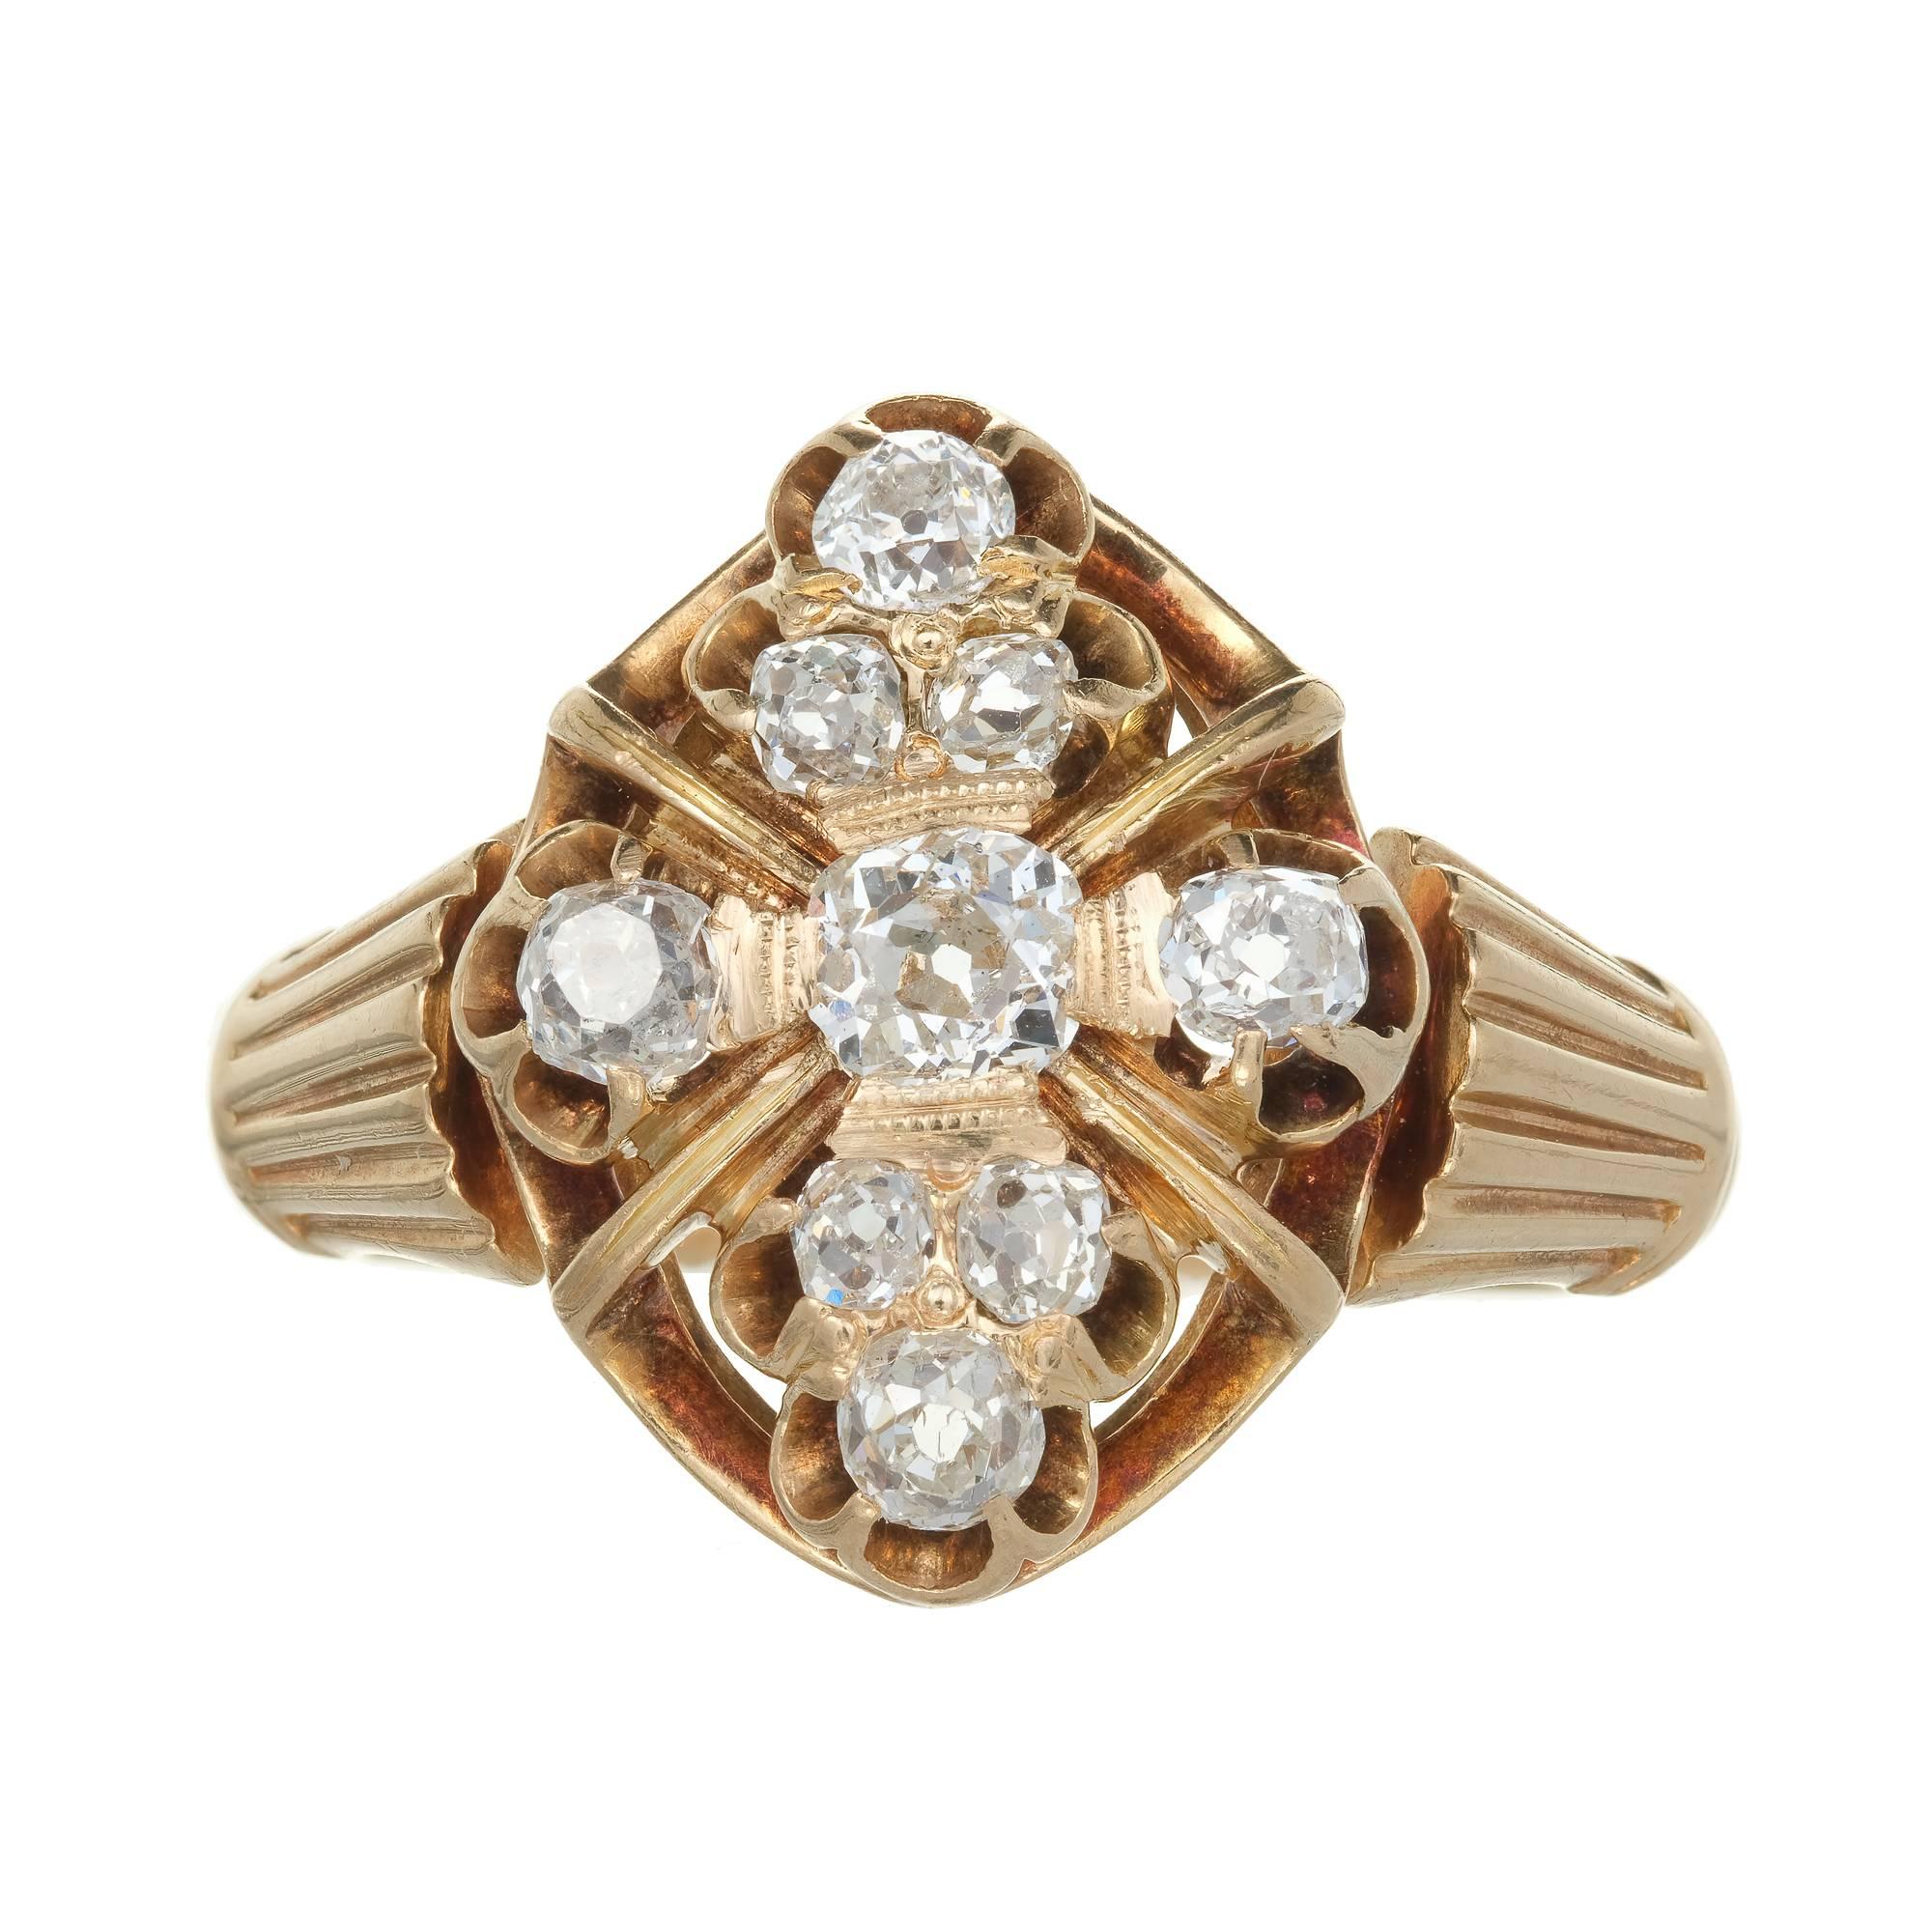  Victorian 1850s Diamond ring with beautiful bright sparkly old mine brilliant cut Diamonds in a 14k yellow gold and natural patina setting .

9 old mine brilliant cut Diamonds, approx. total weight .75cts, I, VS – SI
Size 6.5 and sizable
14k rose